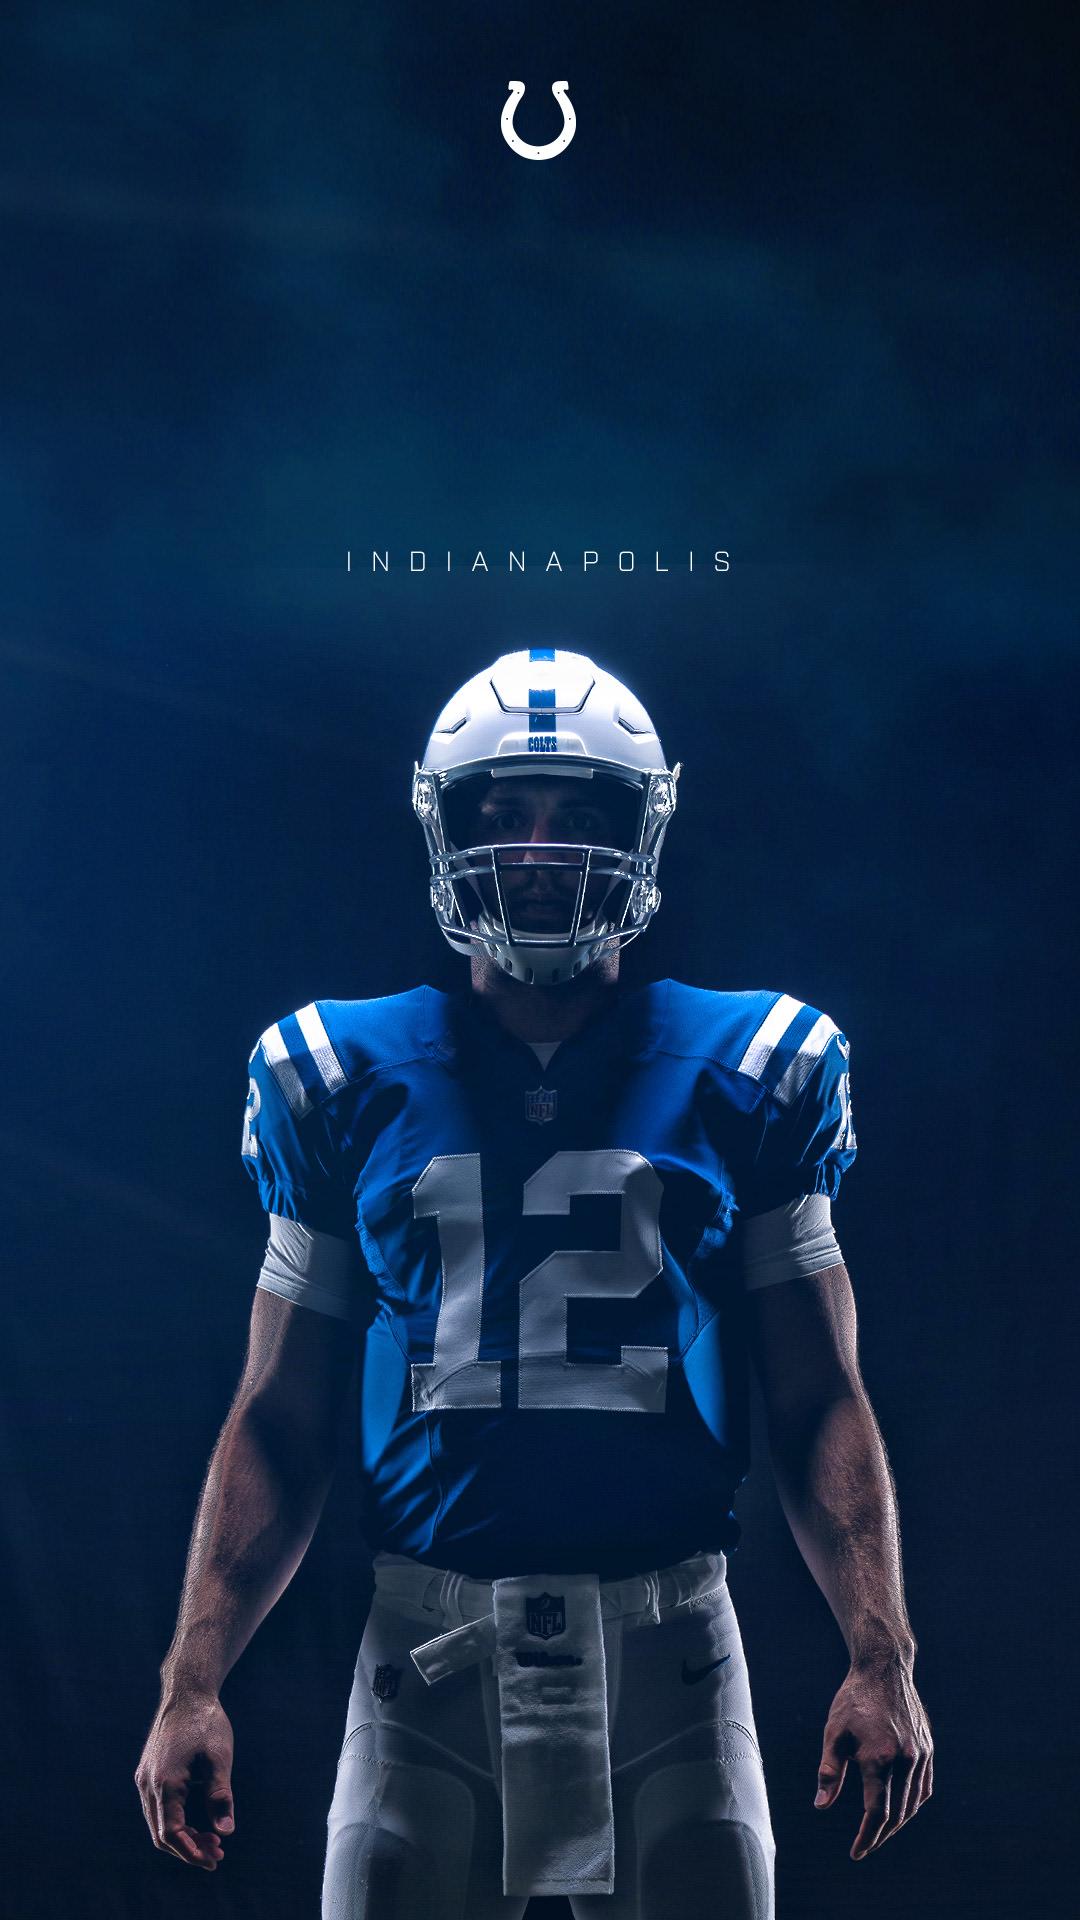 Indianapolis Colts on Twitter Wallpaper Wentzday   httpstco6xNNJ3Lh9n  Twitter